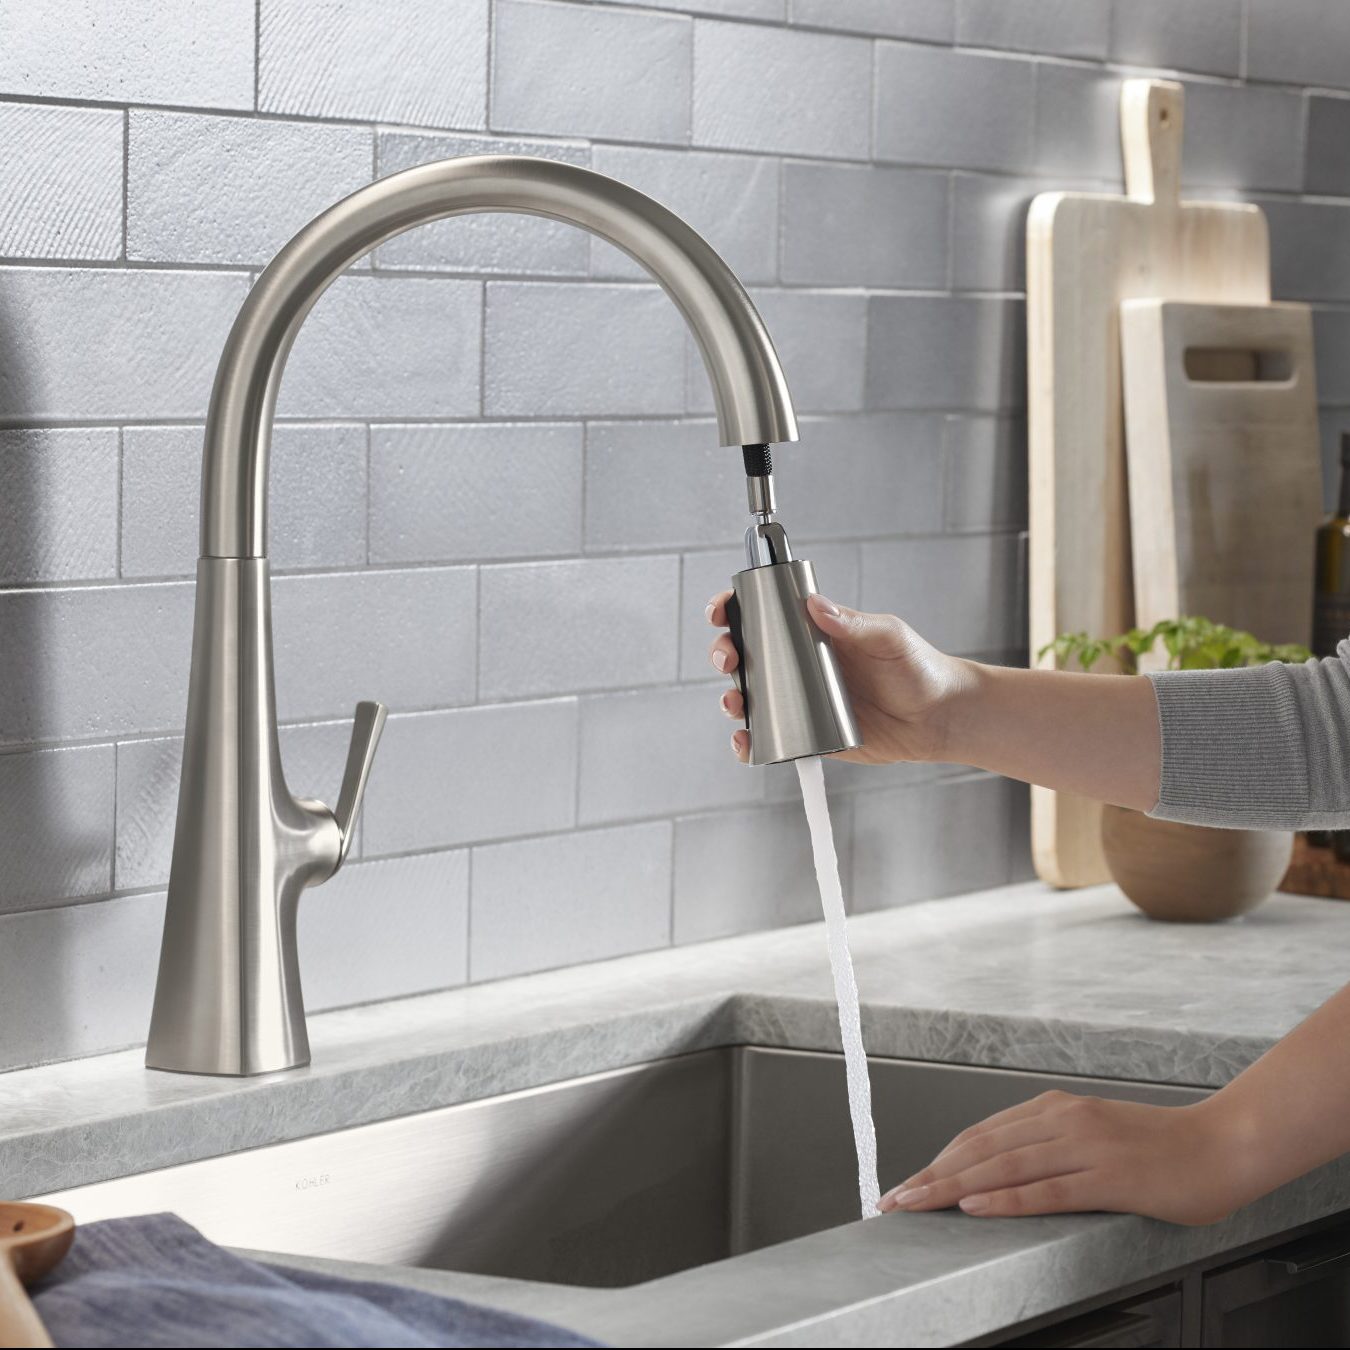 The Advantages and Disadvantages of a Kitchen Faucet With Sprayer